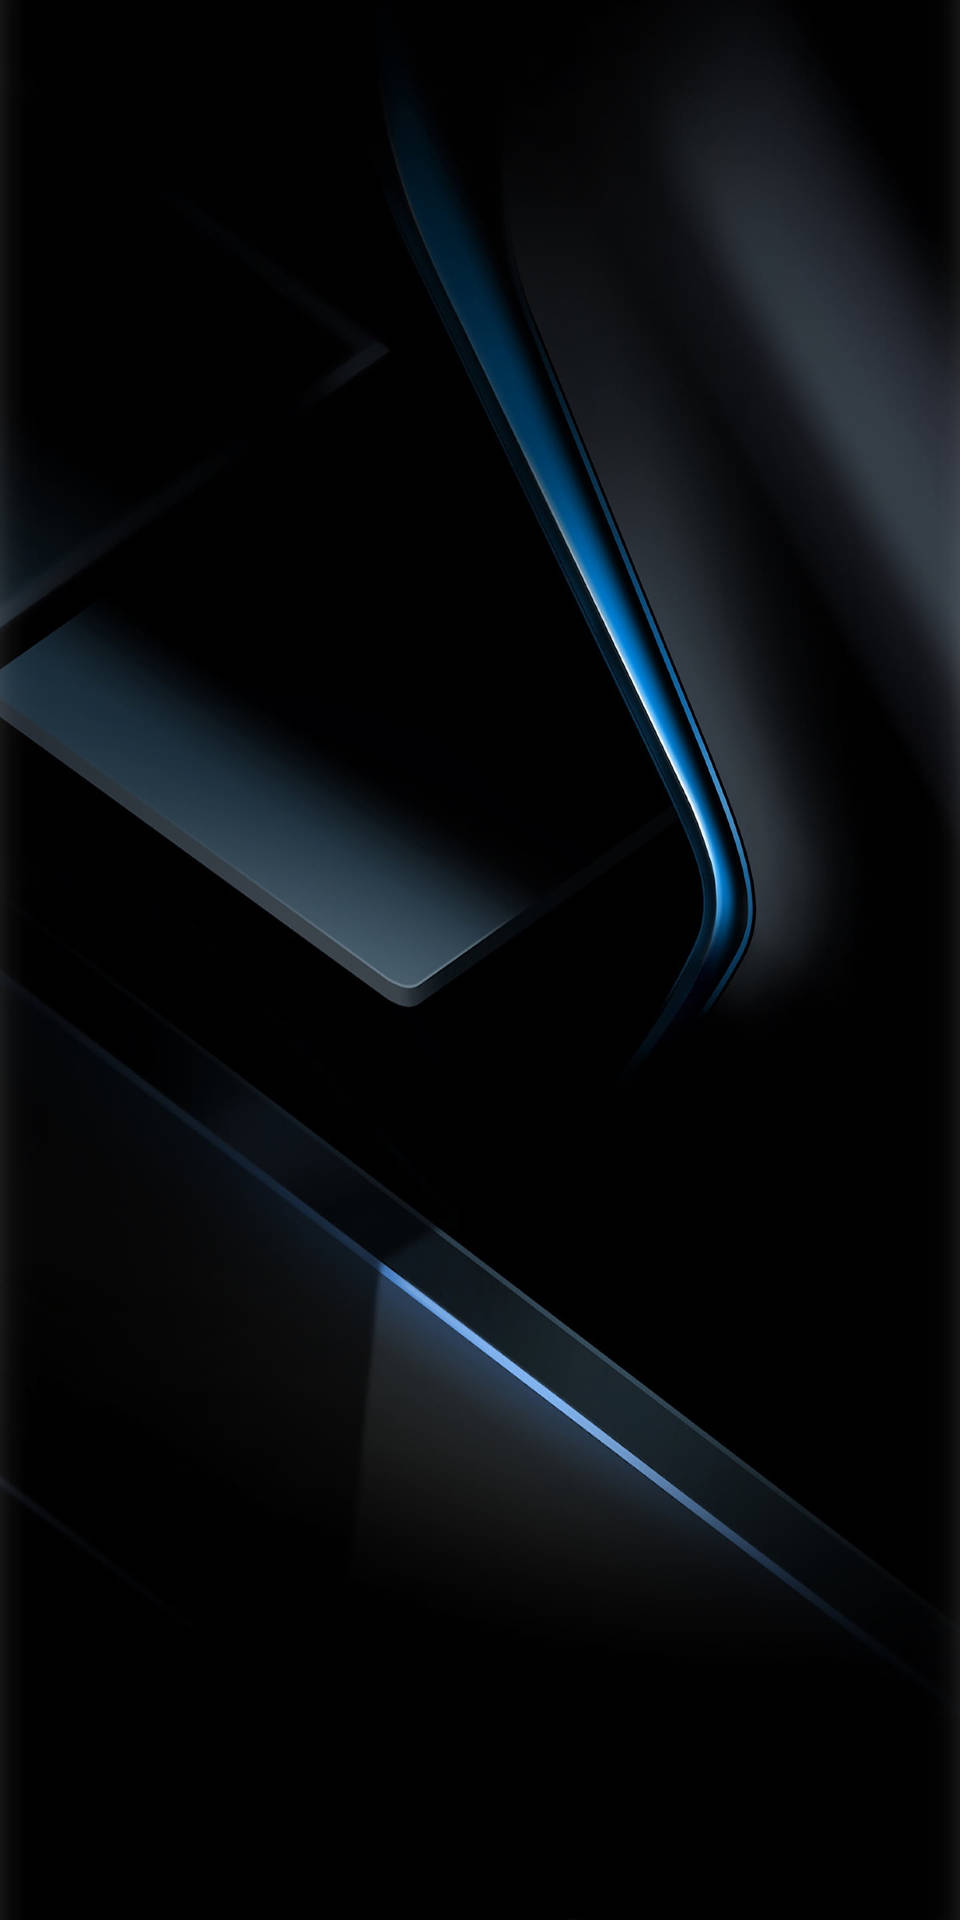 Exceptional Geometric Design In Blue And Black On Samsung Full Hd Background